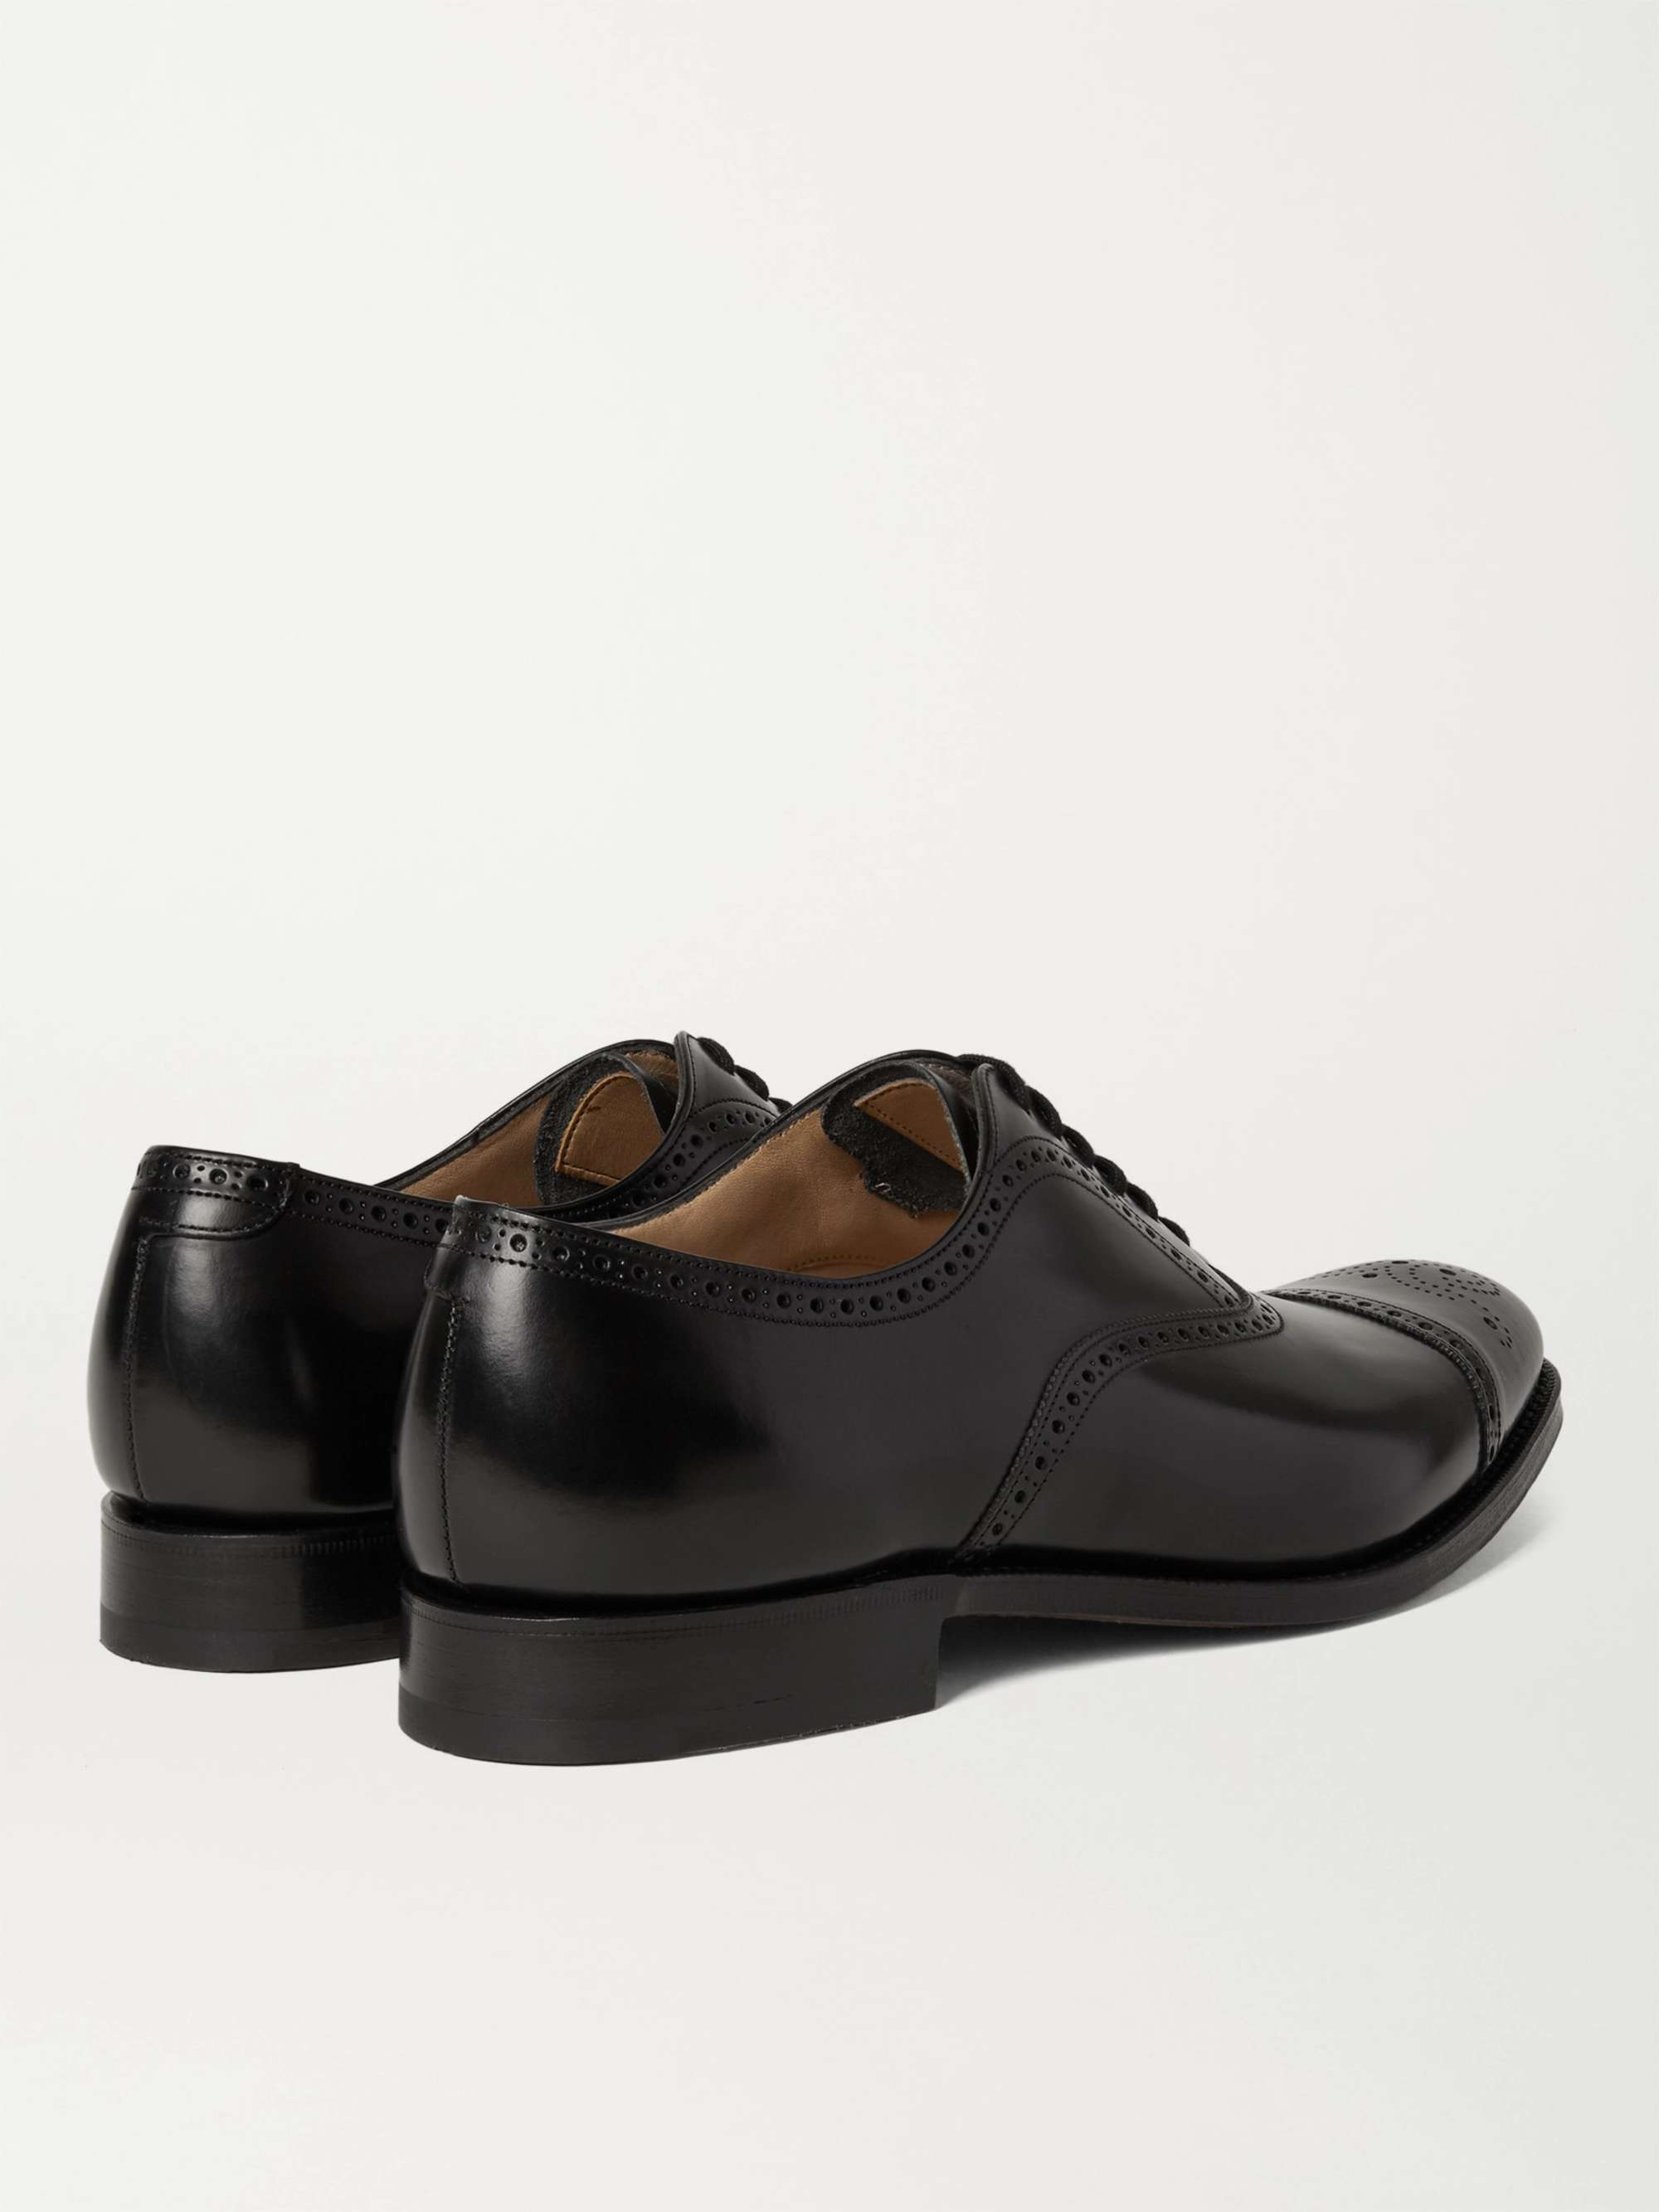 Mens Shoes Lace-ups Brogues Churchs Berlin Leather Oxford Brogues in Black for Men 